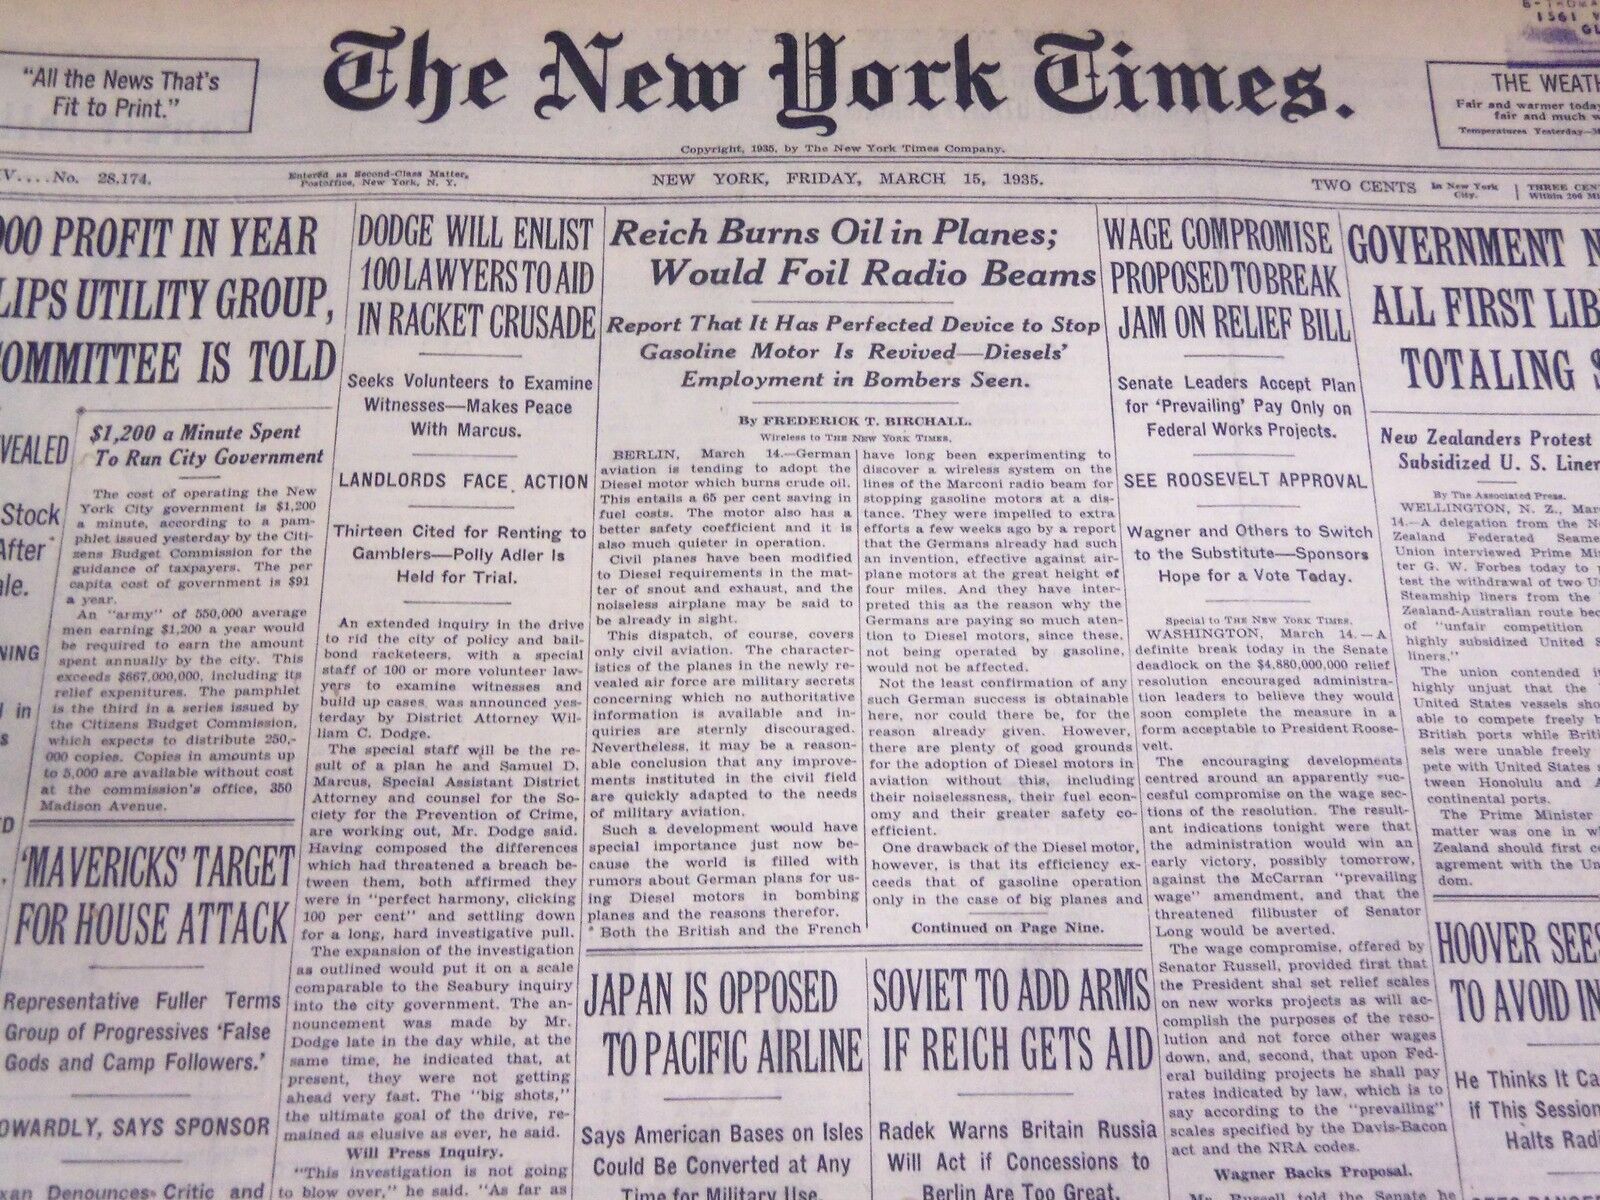 1935 MARCH 15 NEW YORK TIMES - REICH BURNS OIL IN PLANES - NT 3820